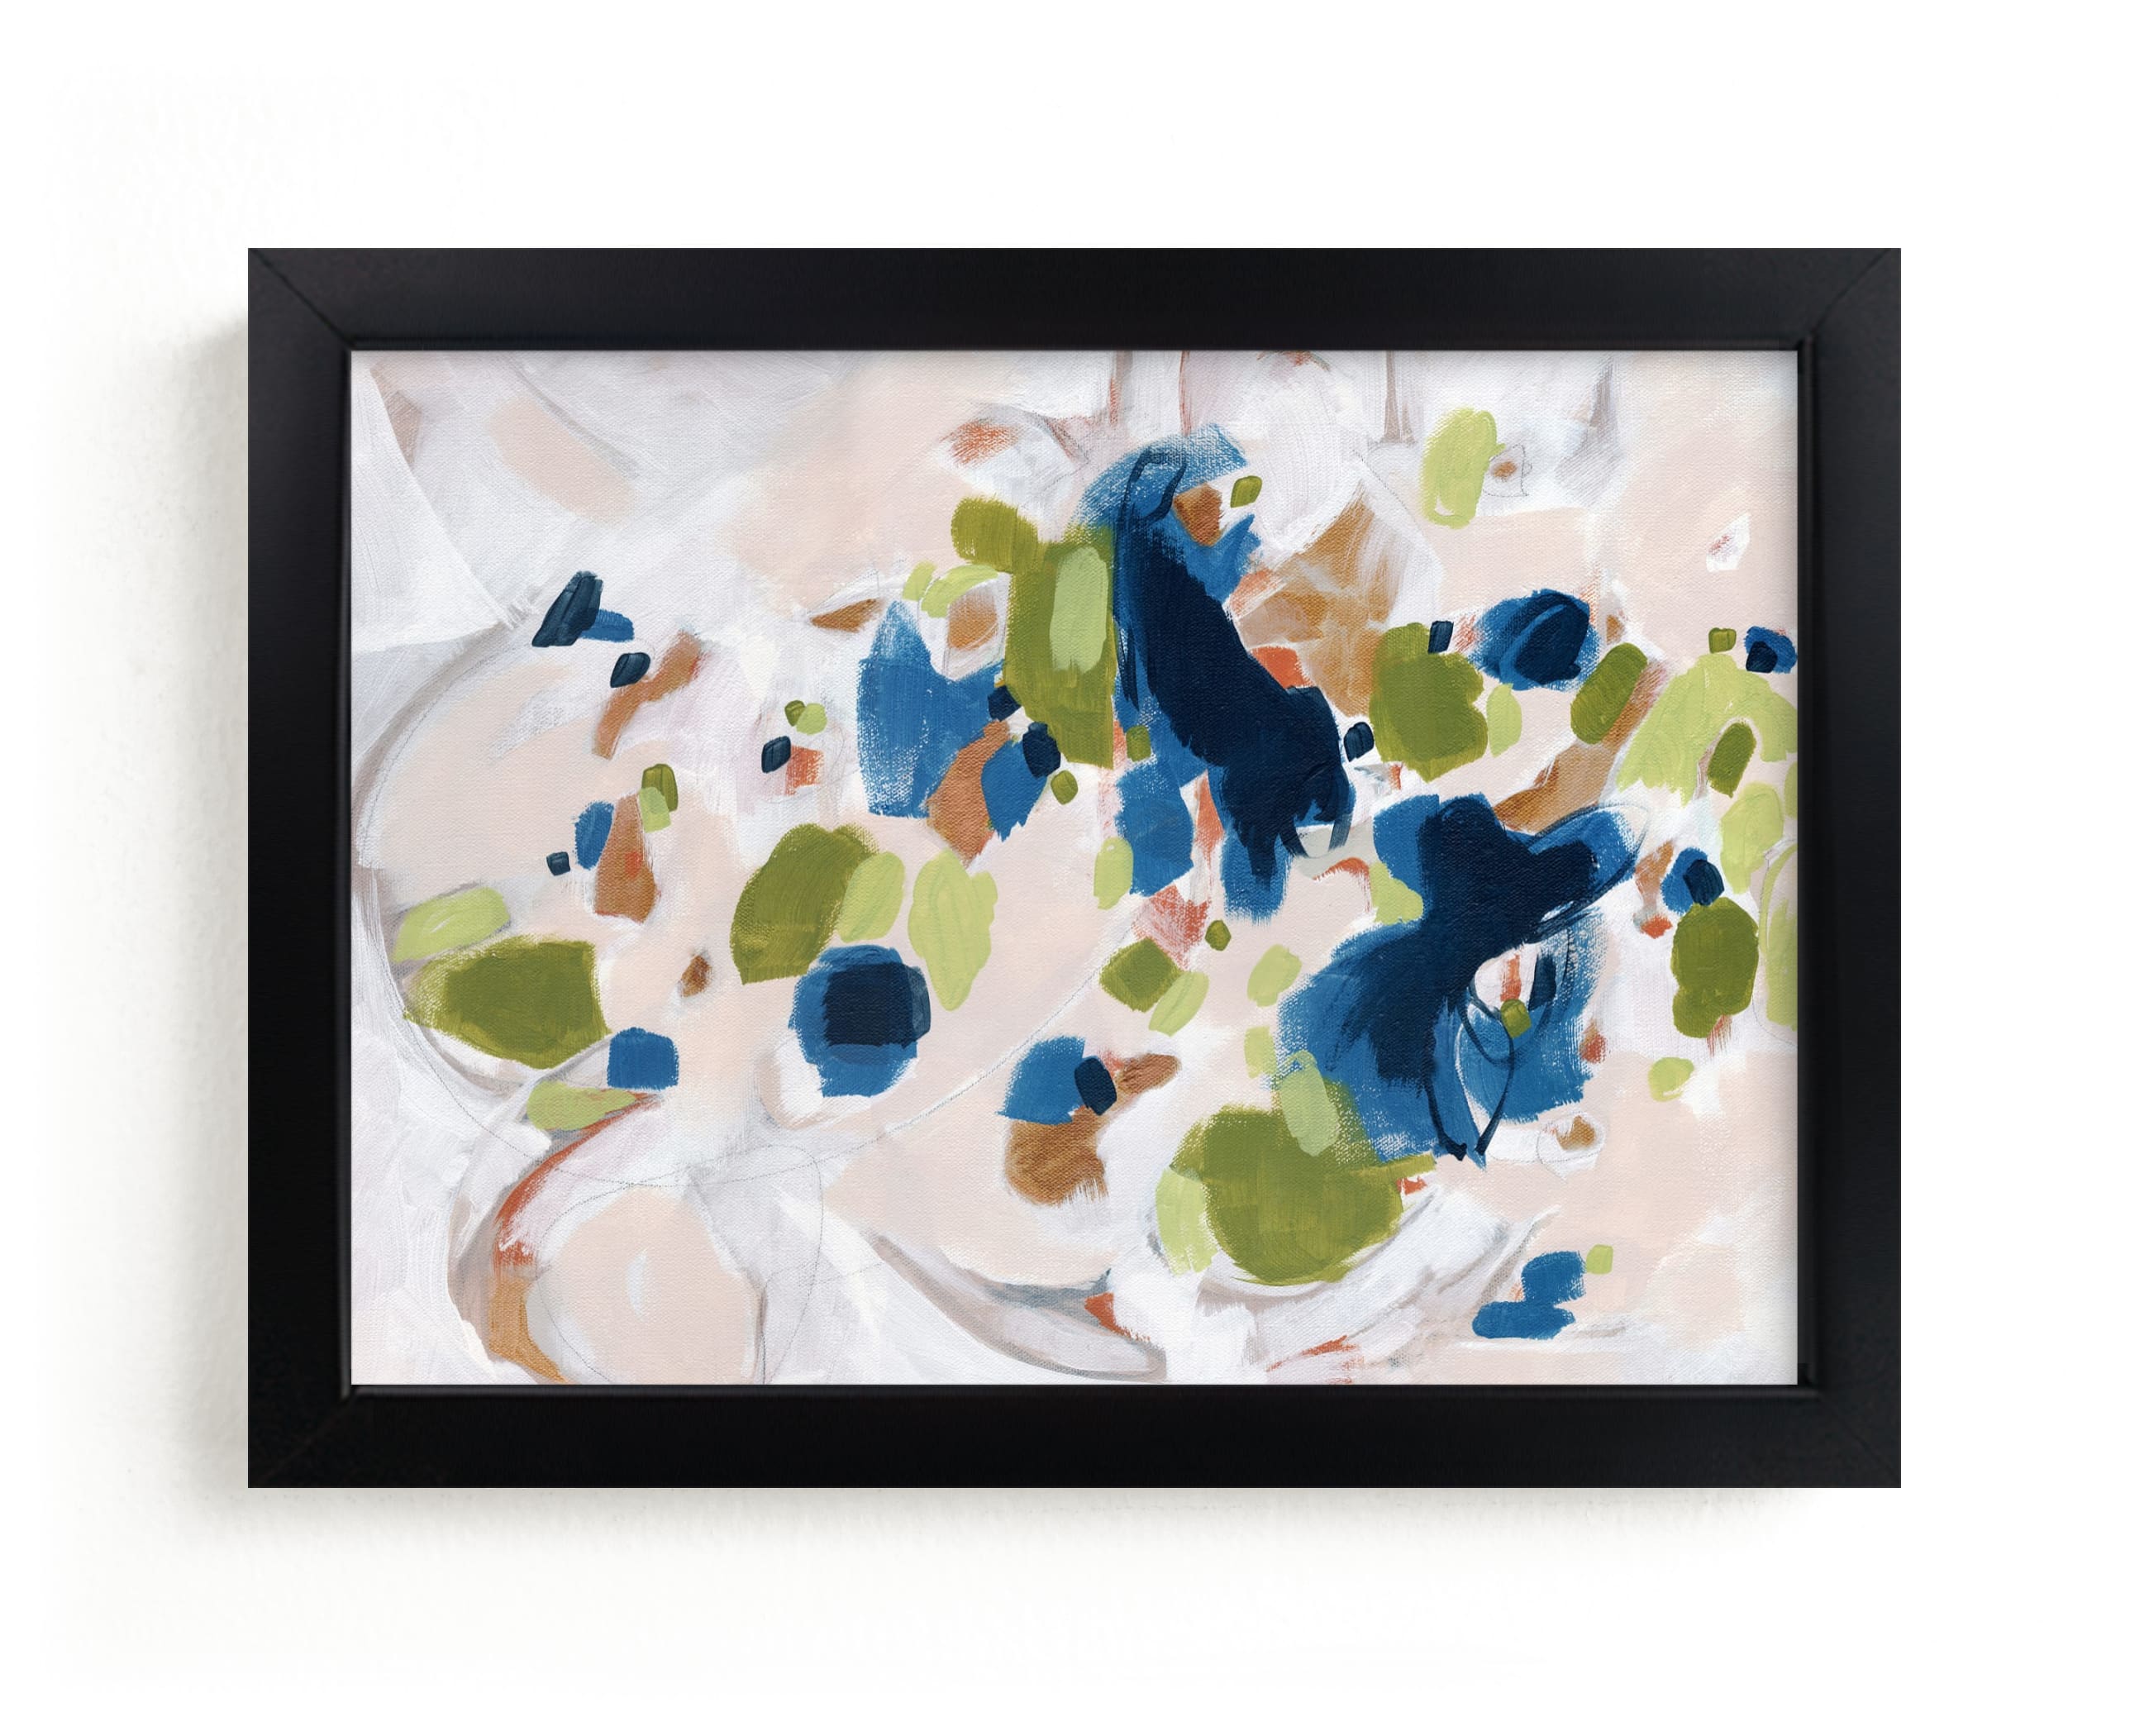 LaRue No.2 Wall Art Prints by Lorent and Leif | Minted